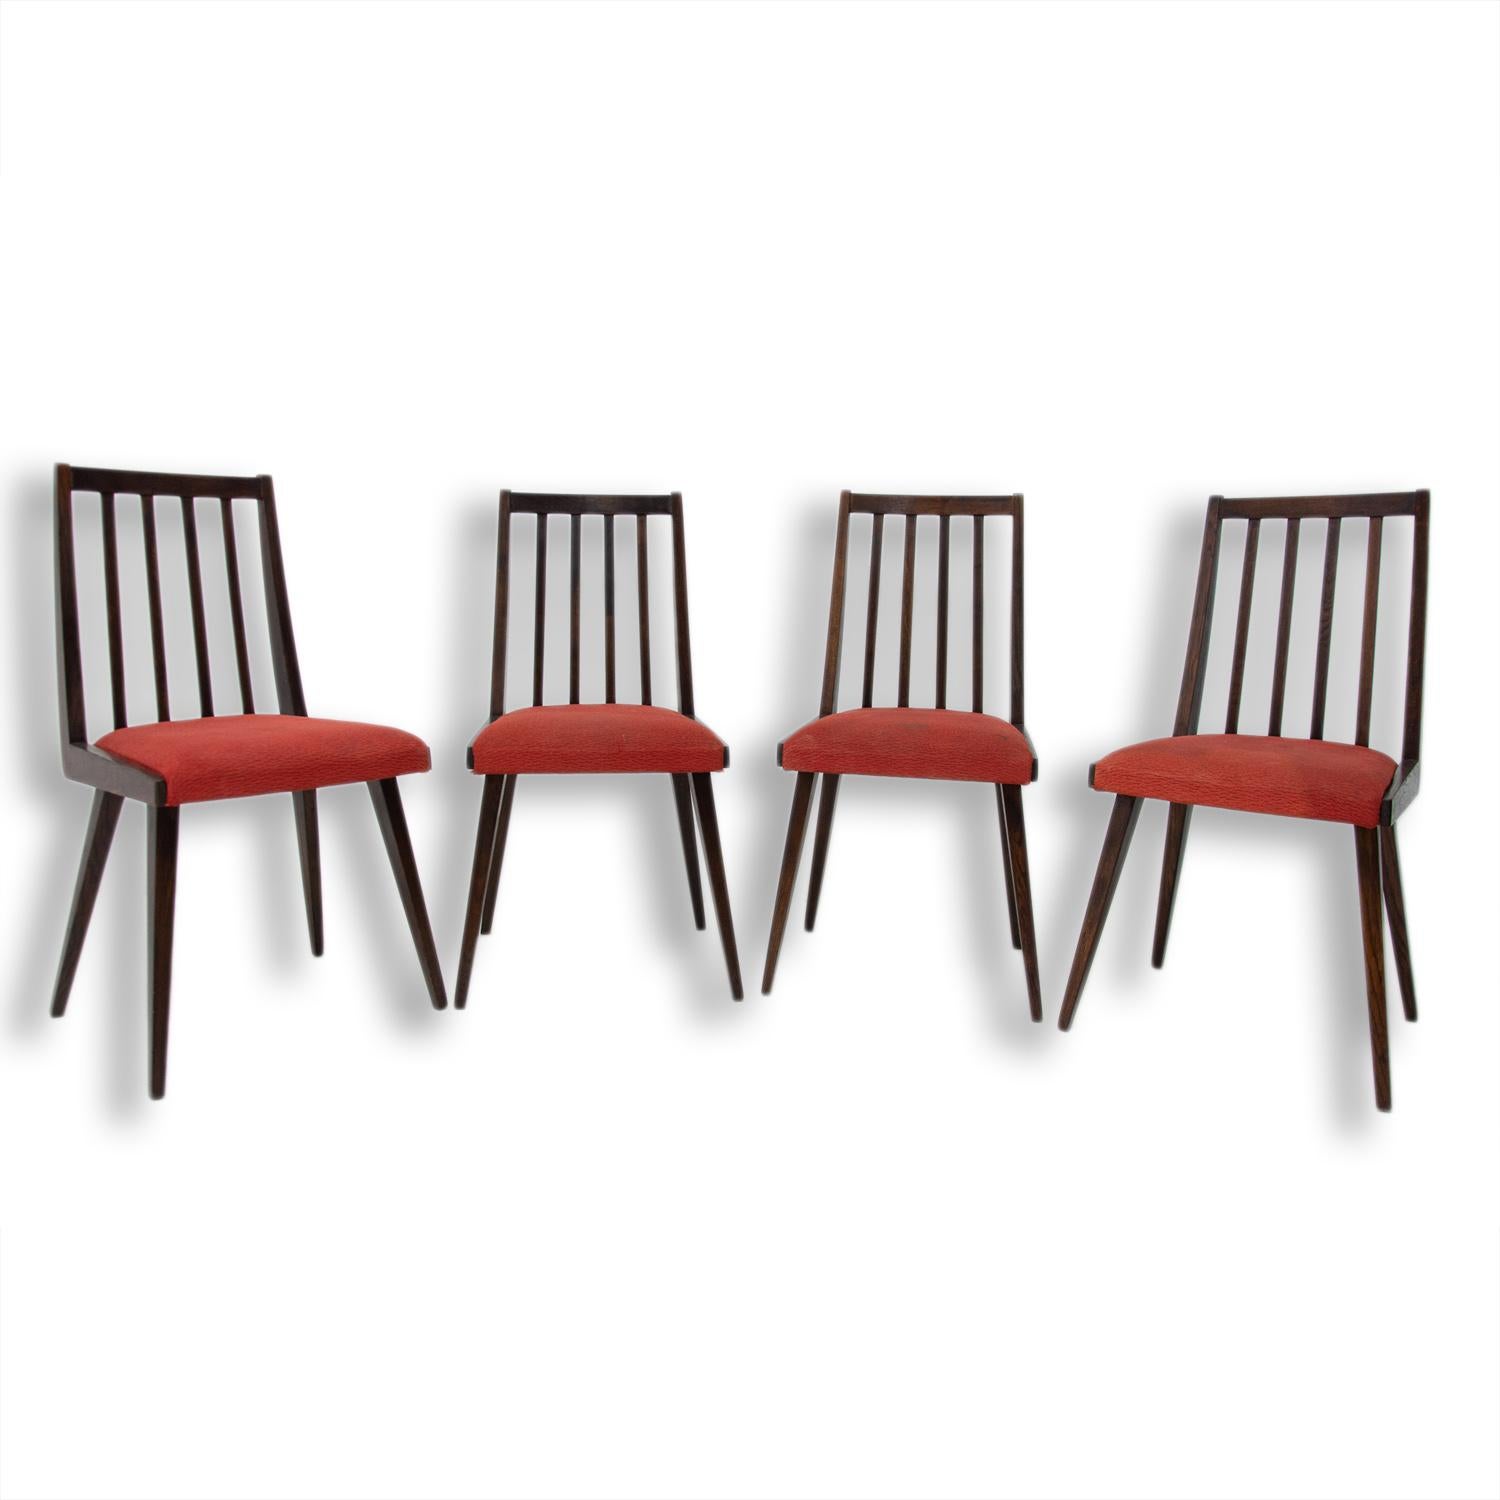 These dining chairs were designed by Jirí Jiroutek for Interiér Praha as part of U-550 living room set. They were made in the former Czechoslovakia in the 1960s. The structure is made of beechwood and the chairs has original upholstery. The chairs